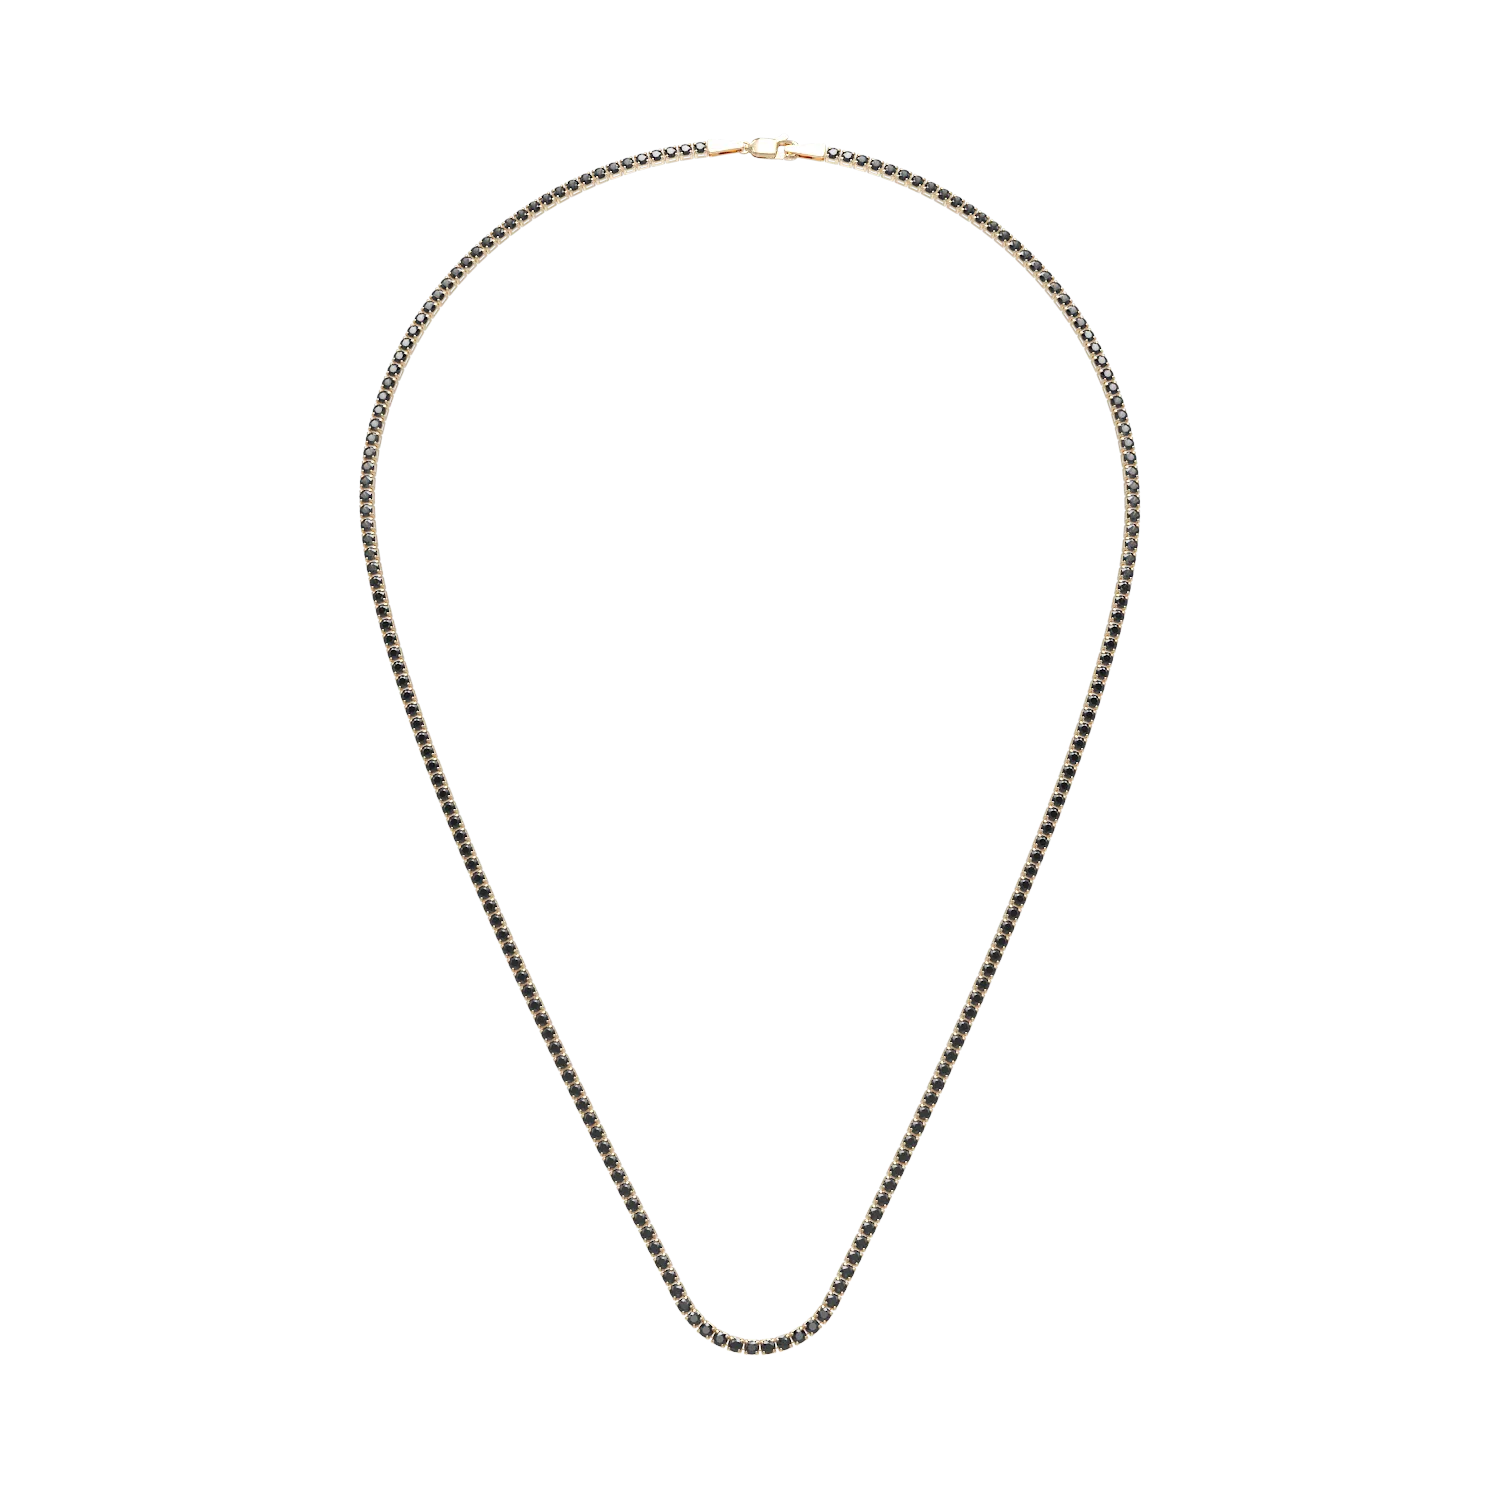 Yellow gold tennis necklace with black zirconia